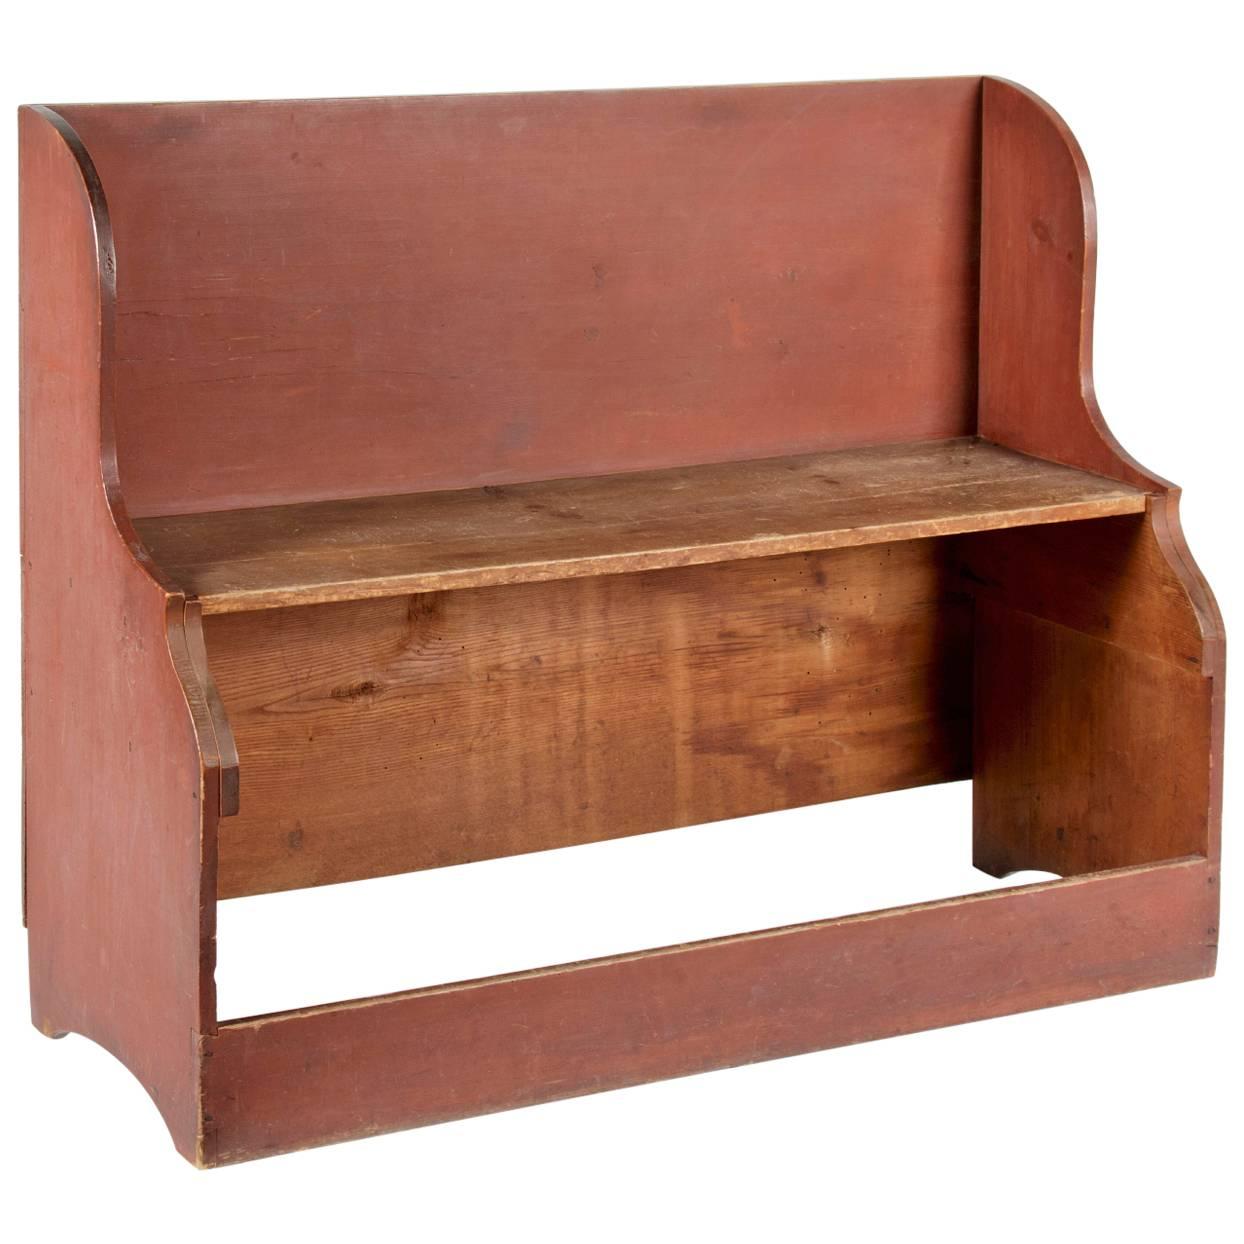 Unusual Deacons Bench/Bucket Bench in Dry Salmon Red Paint